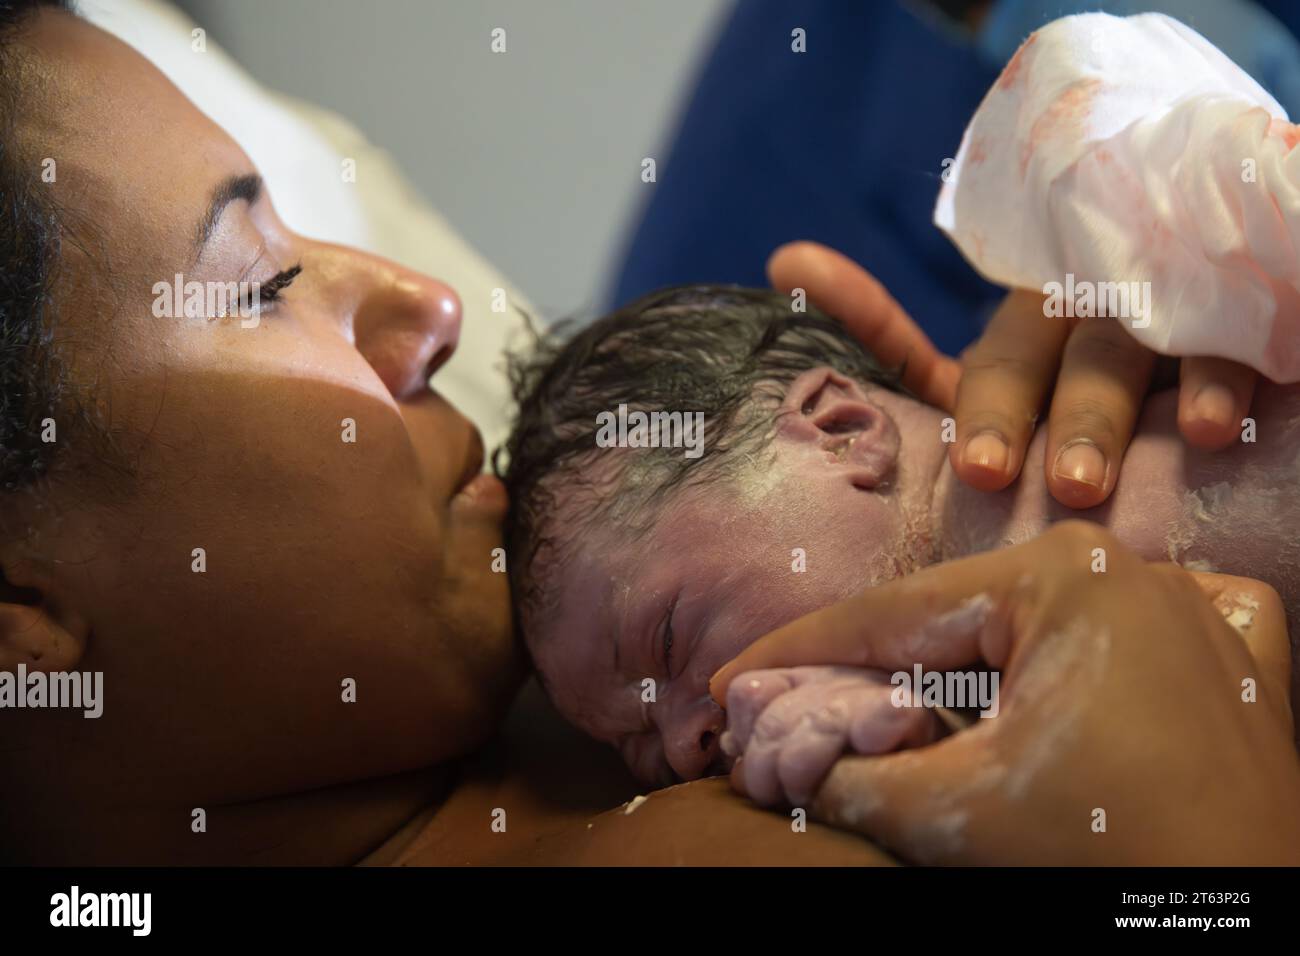 A close-up view of a mother lovingly holding her newborn baby, cherishing the first moments of motherhood Stock Photo